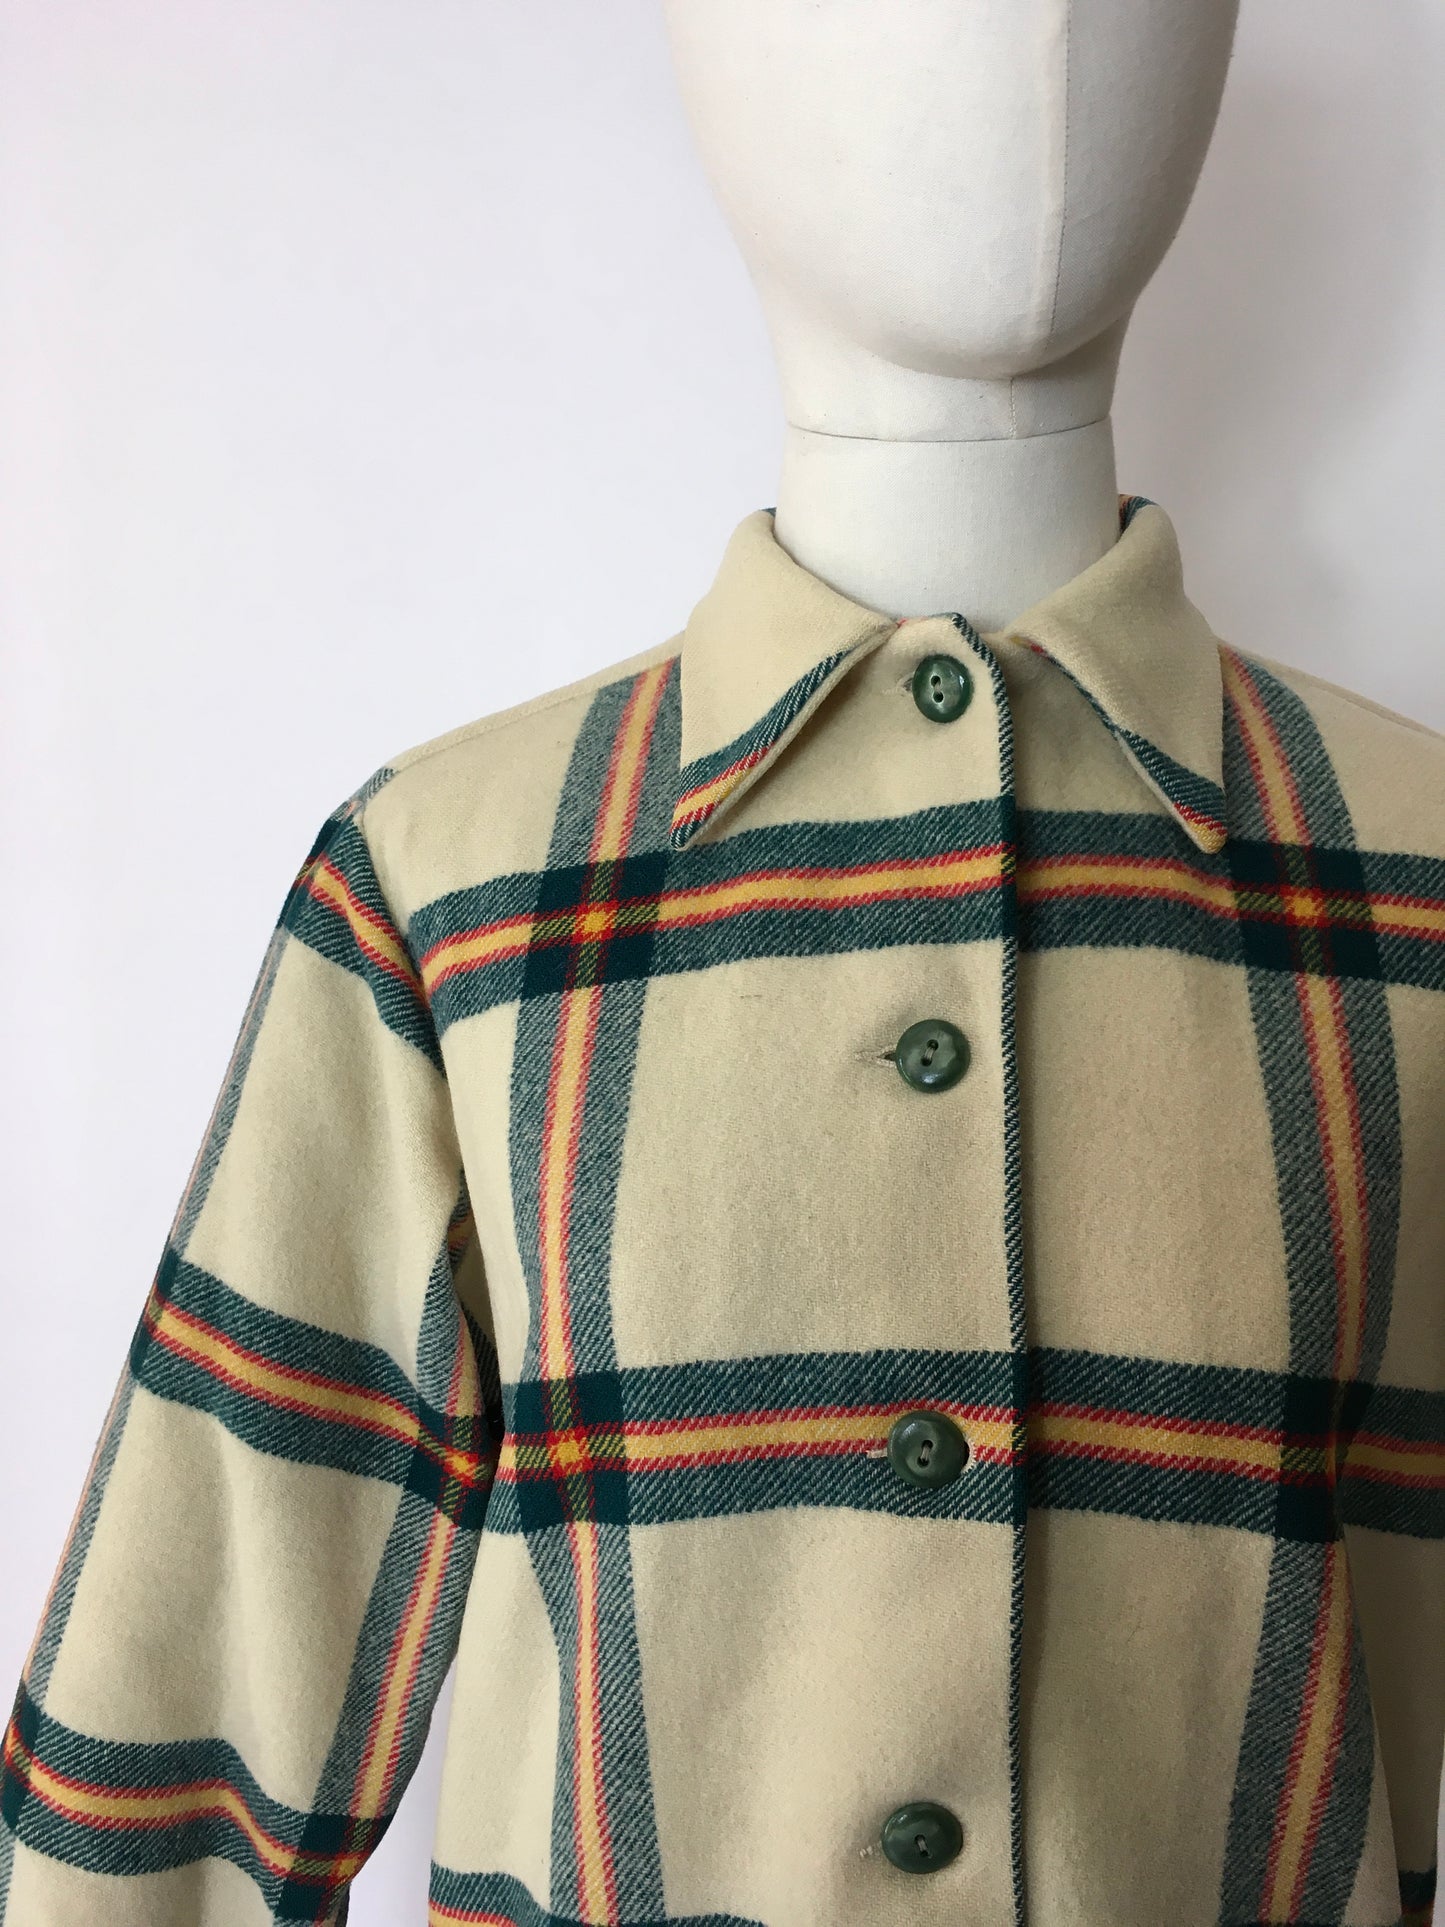 Original 1940’s American Jacket - In a lovely Plaid In Red, Green & Yellow on a Soft Cream